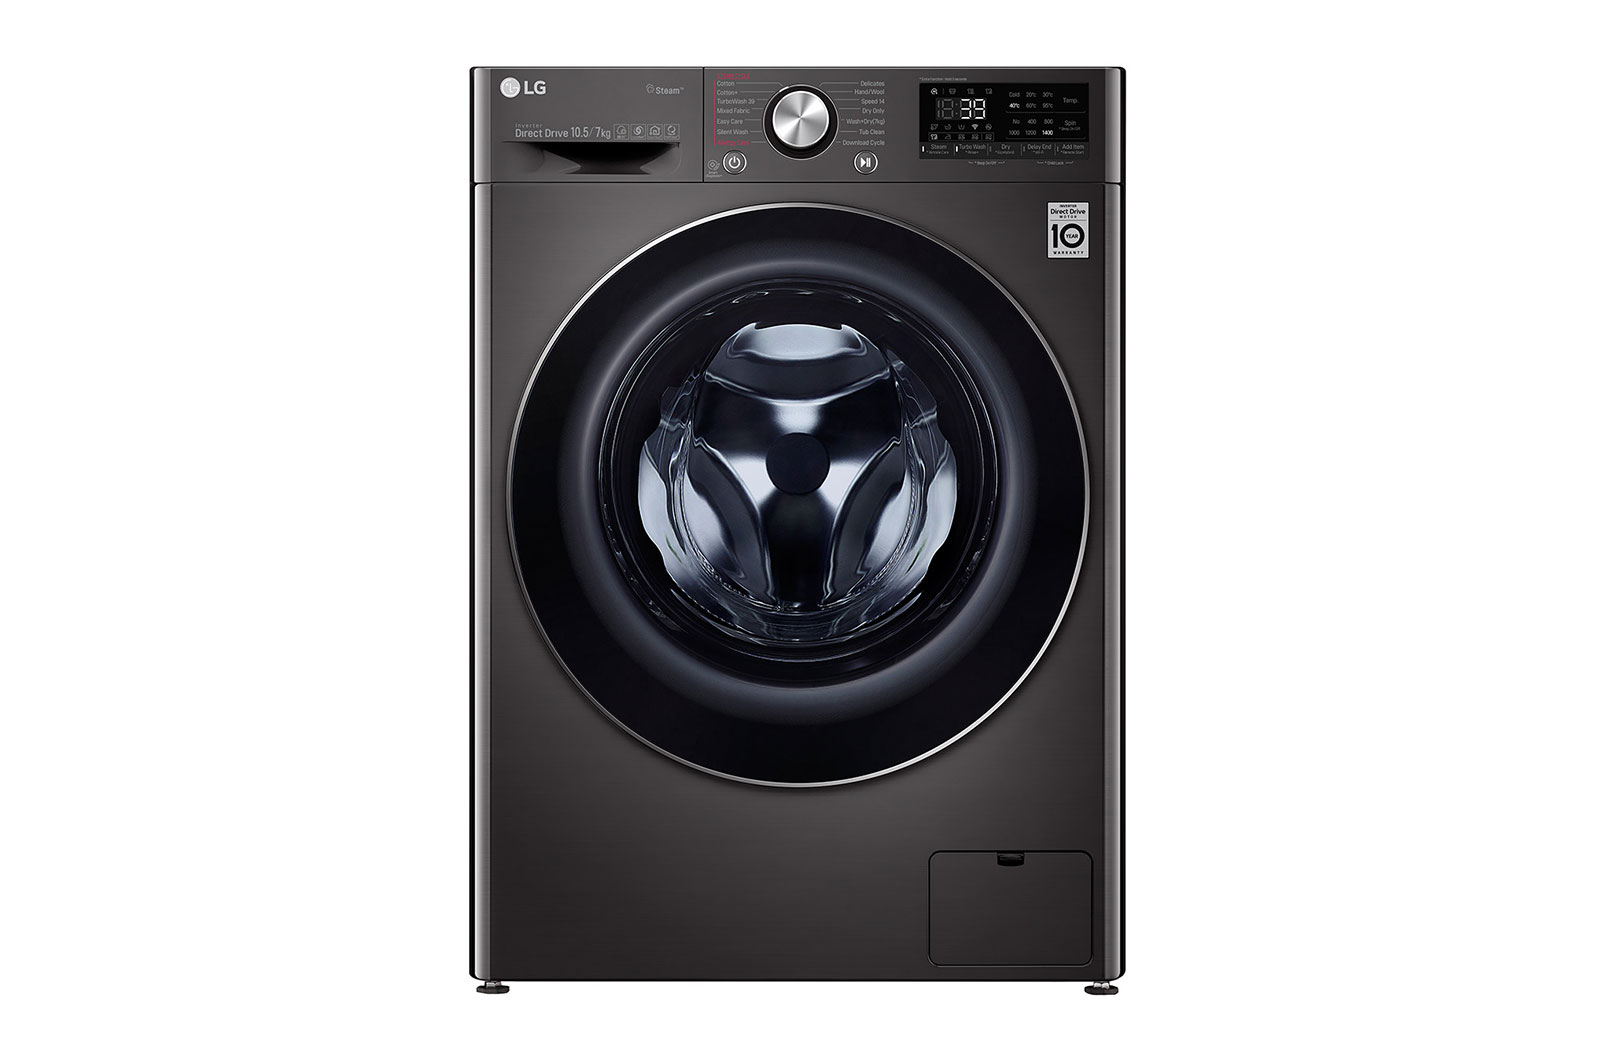 LG Vivace Front Load Automatic Washing Machine with Dryer, 10.5 KG, Black Steel - F4V9RCP2E